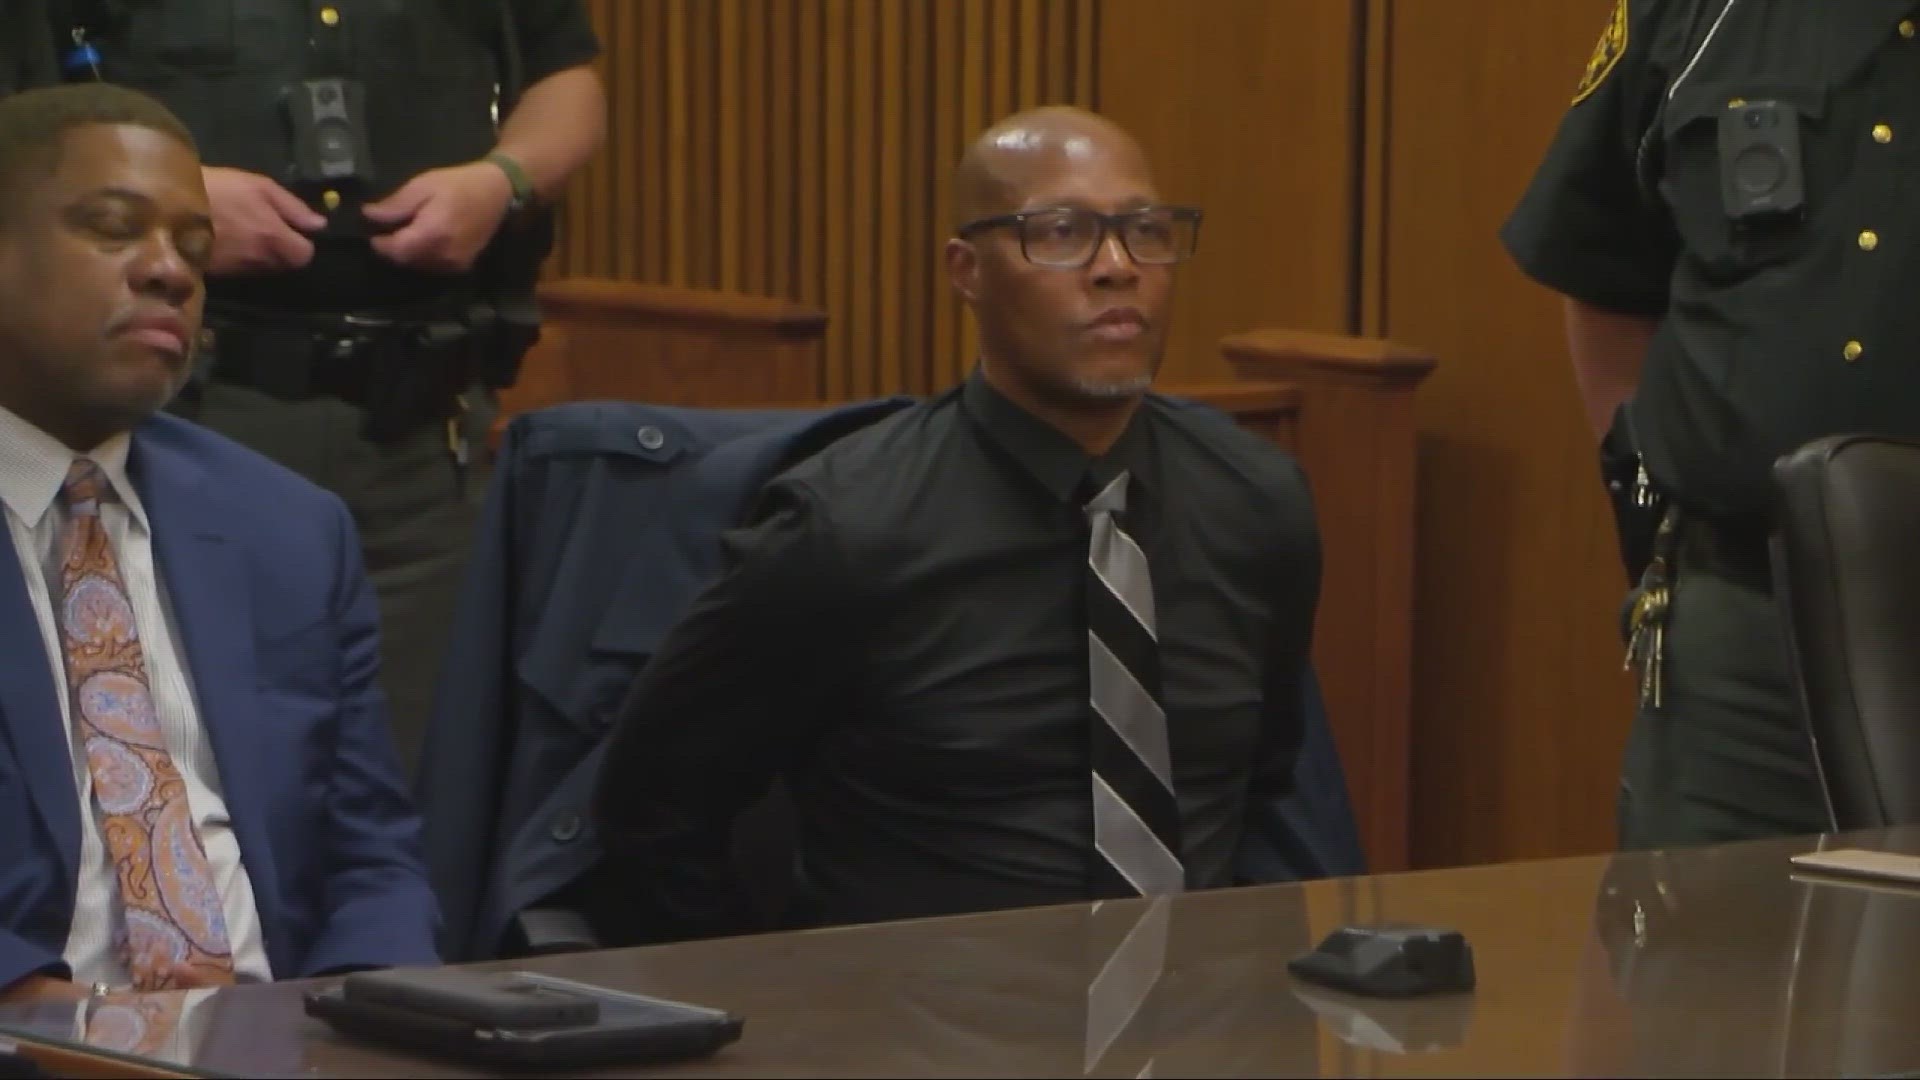 Terence Greene was found guilty on 65 counts involving the sexual assault of eight students between 1998 and 2019.